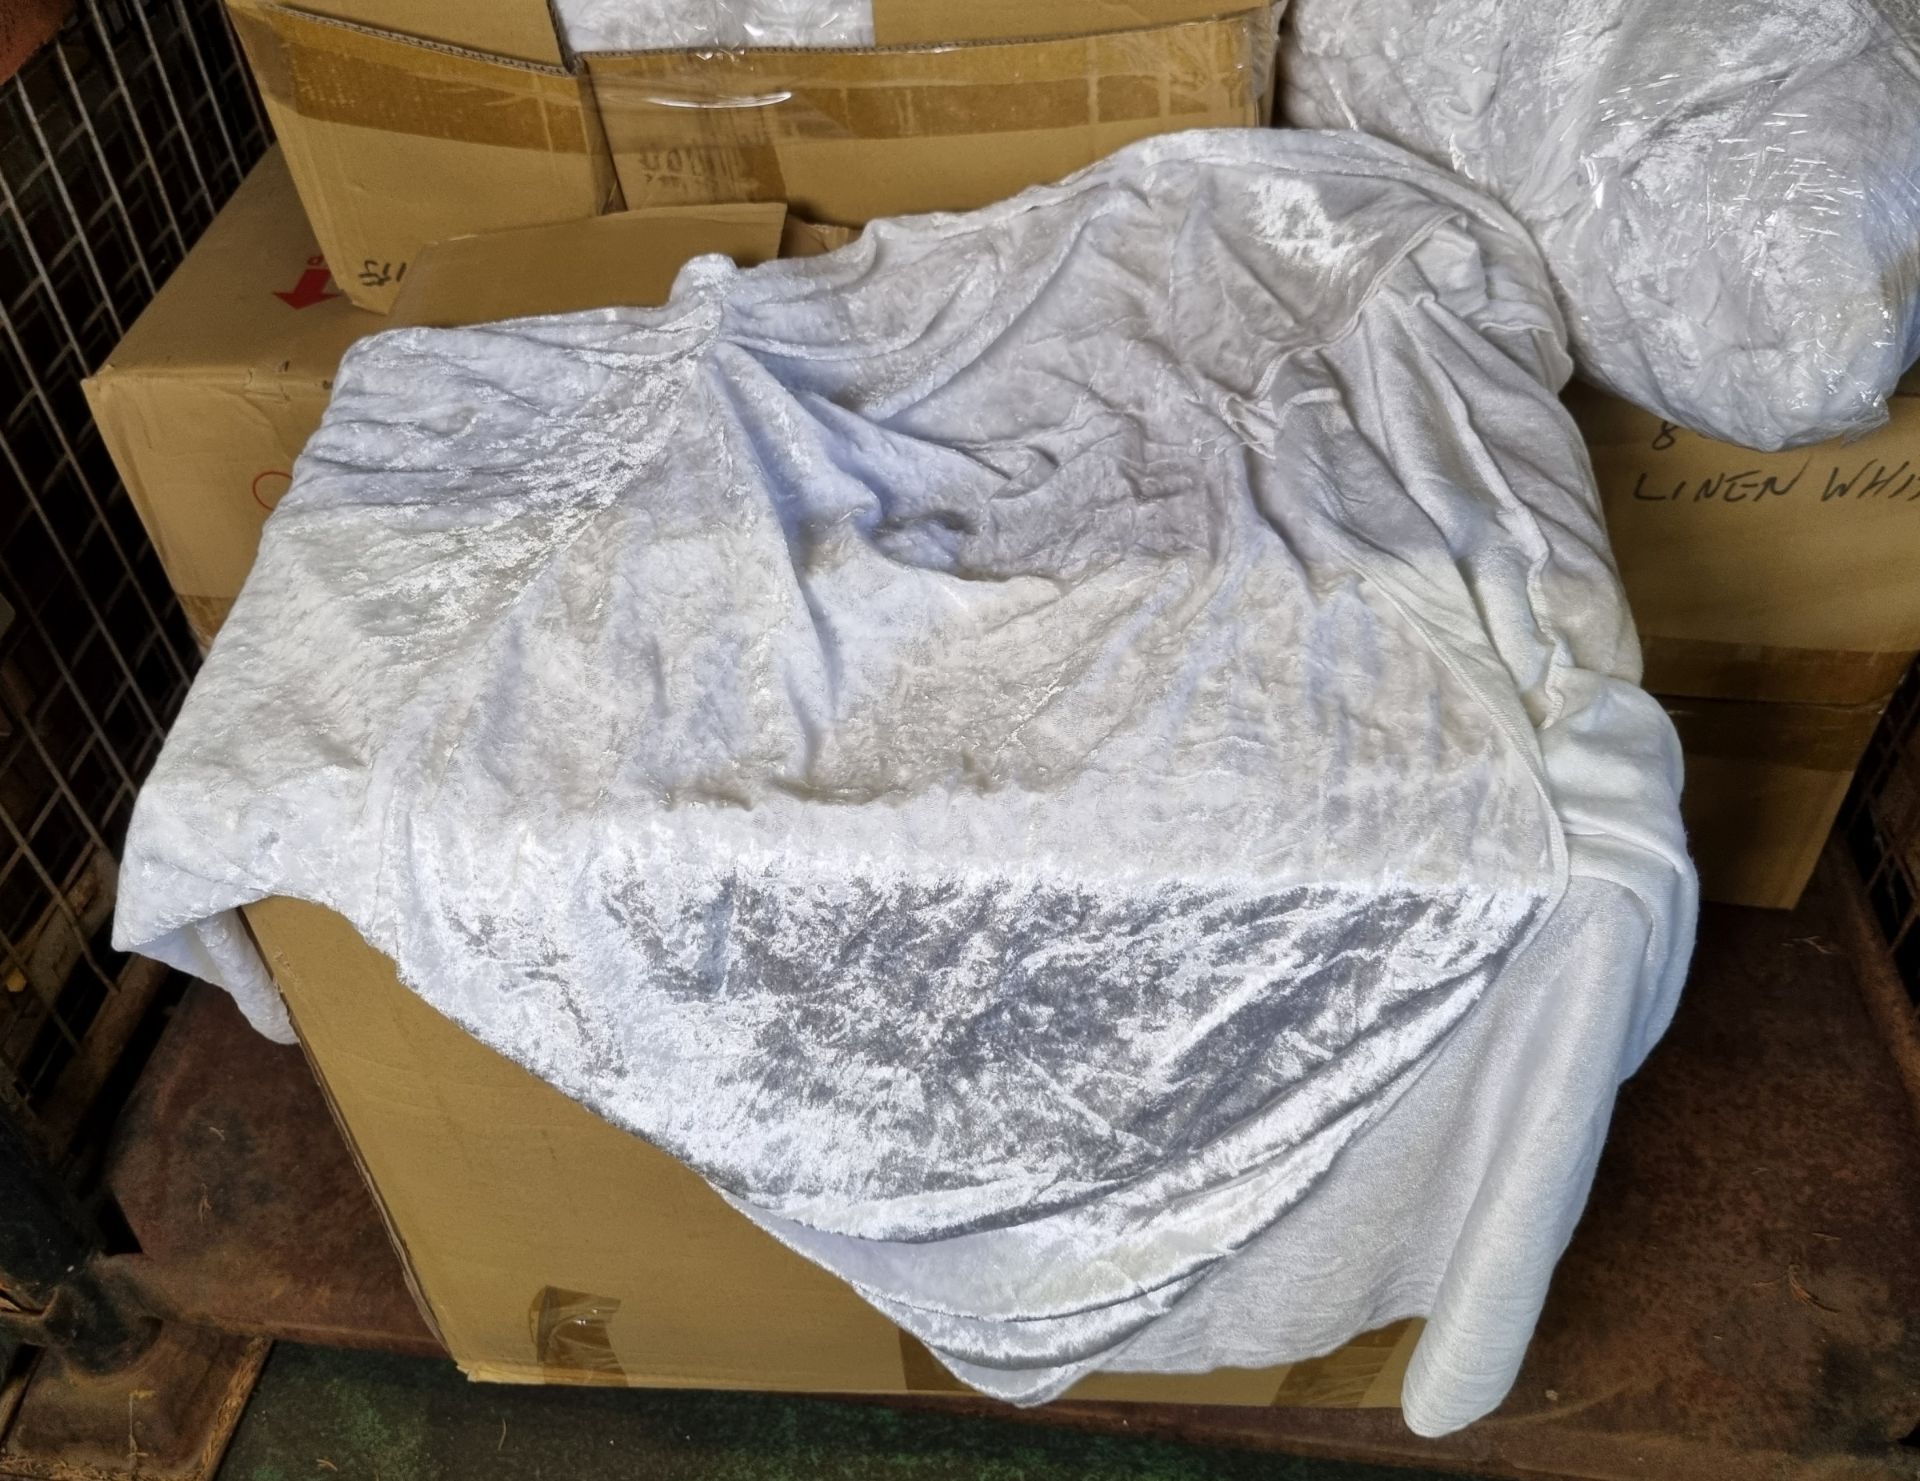 4x boxes of Silver / white linen cover - approximately 80 per box - Image 3 of 3